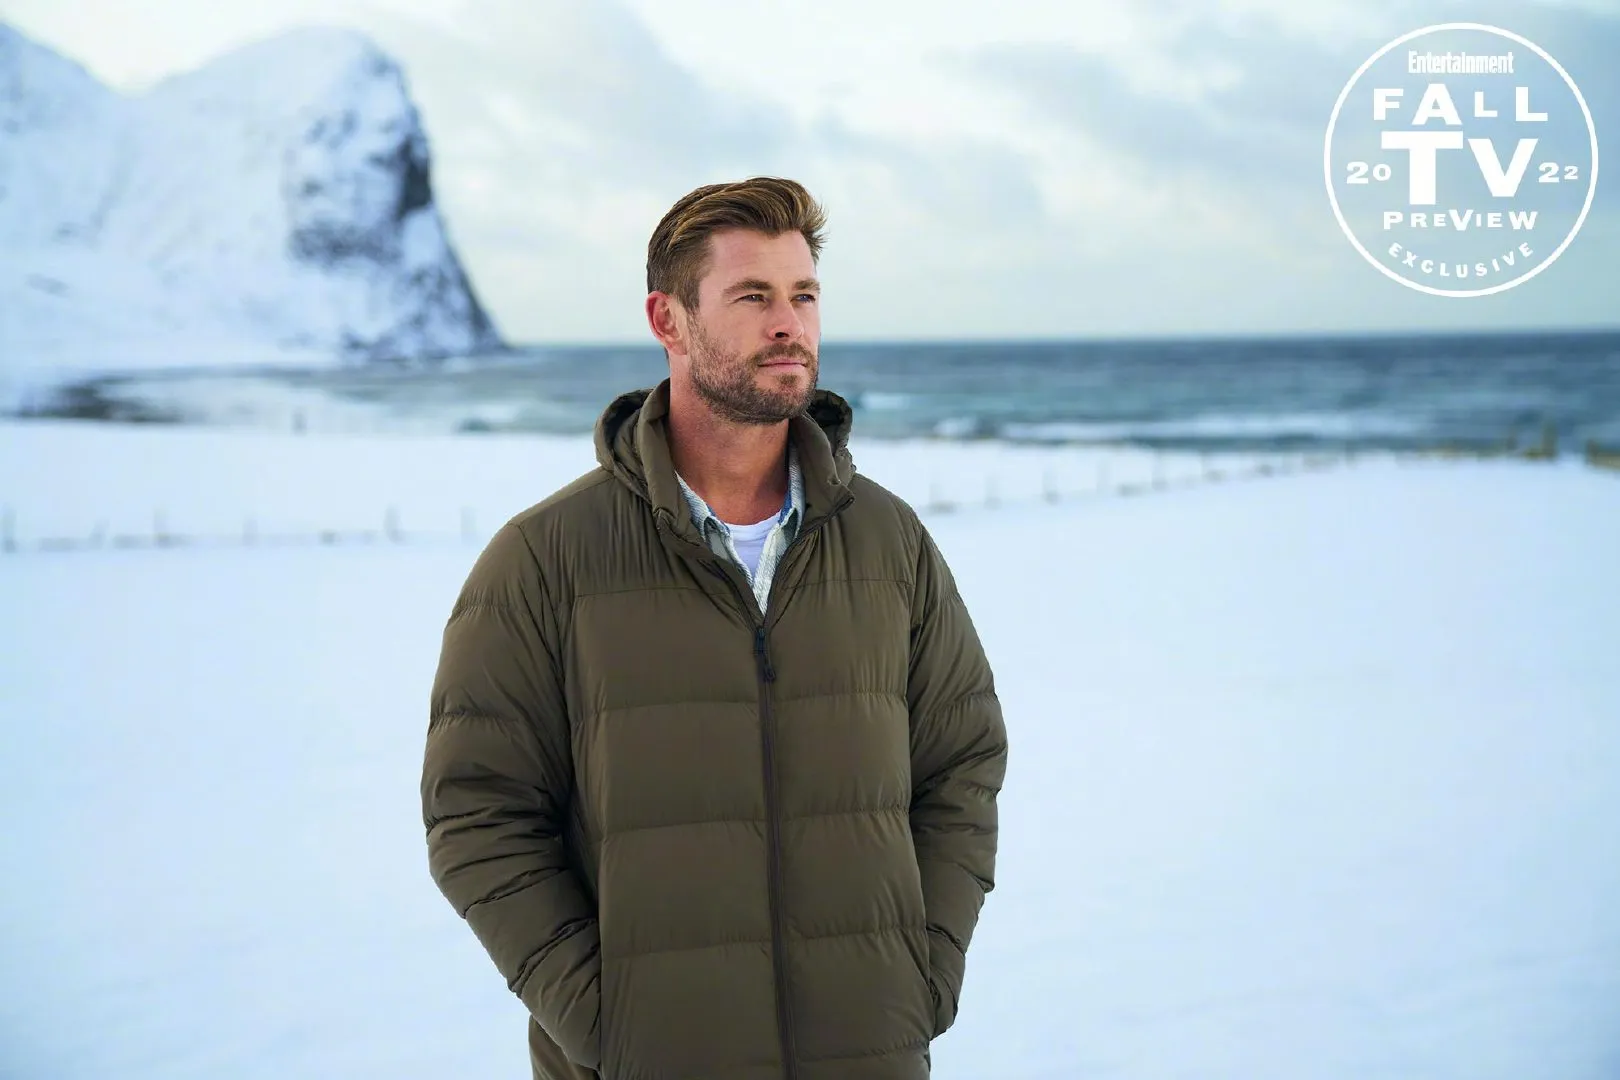 Documentary series 'Limitless with Chris Hemsworth' releases stills, coming to Disney+ in the fall | FMV6